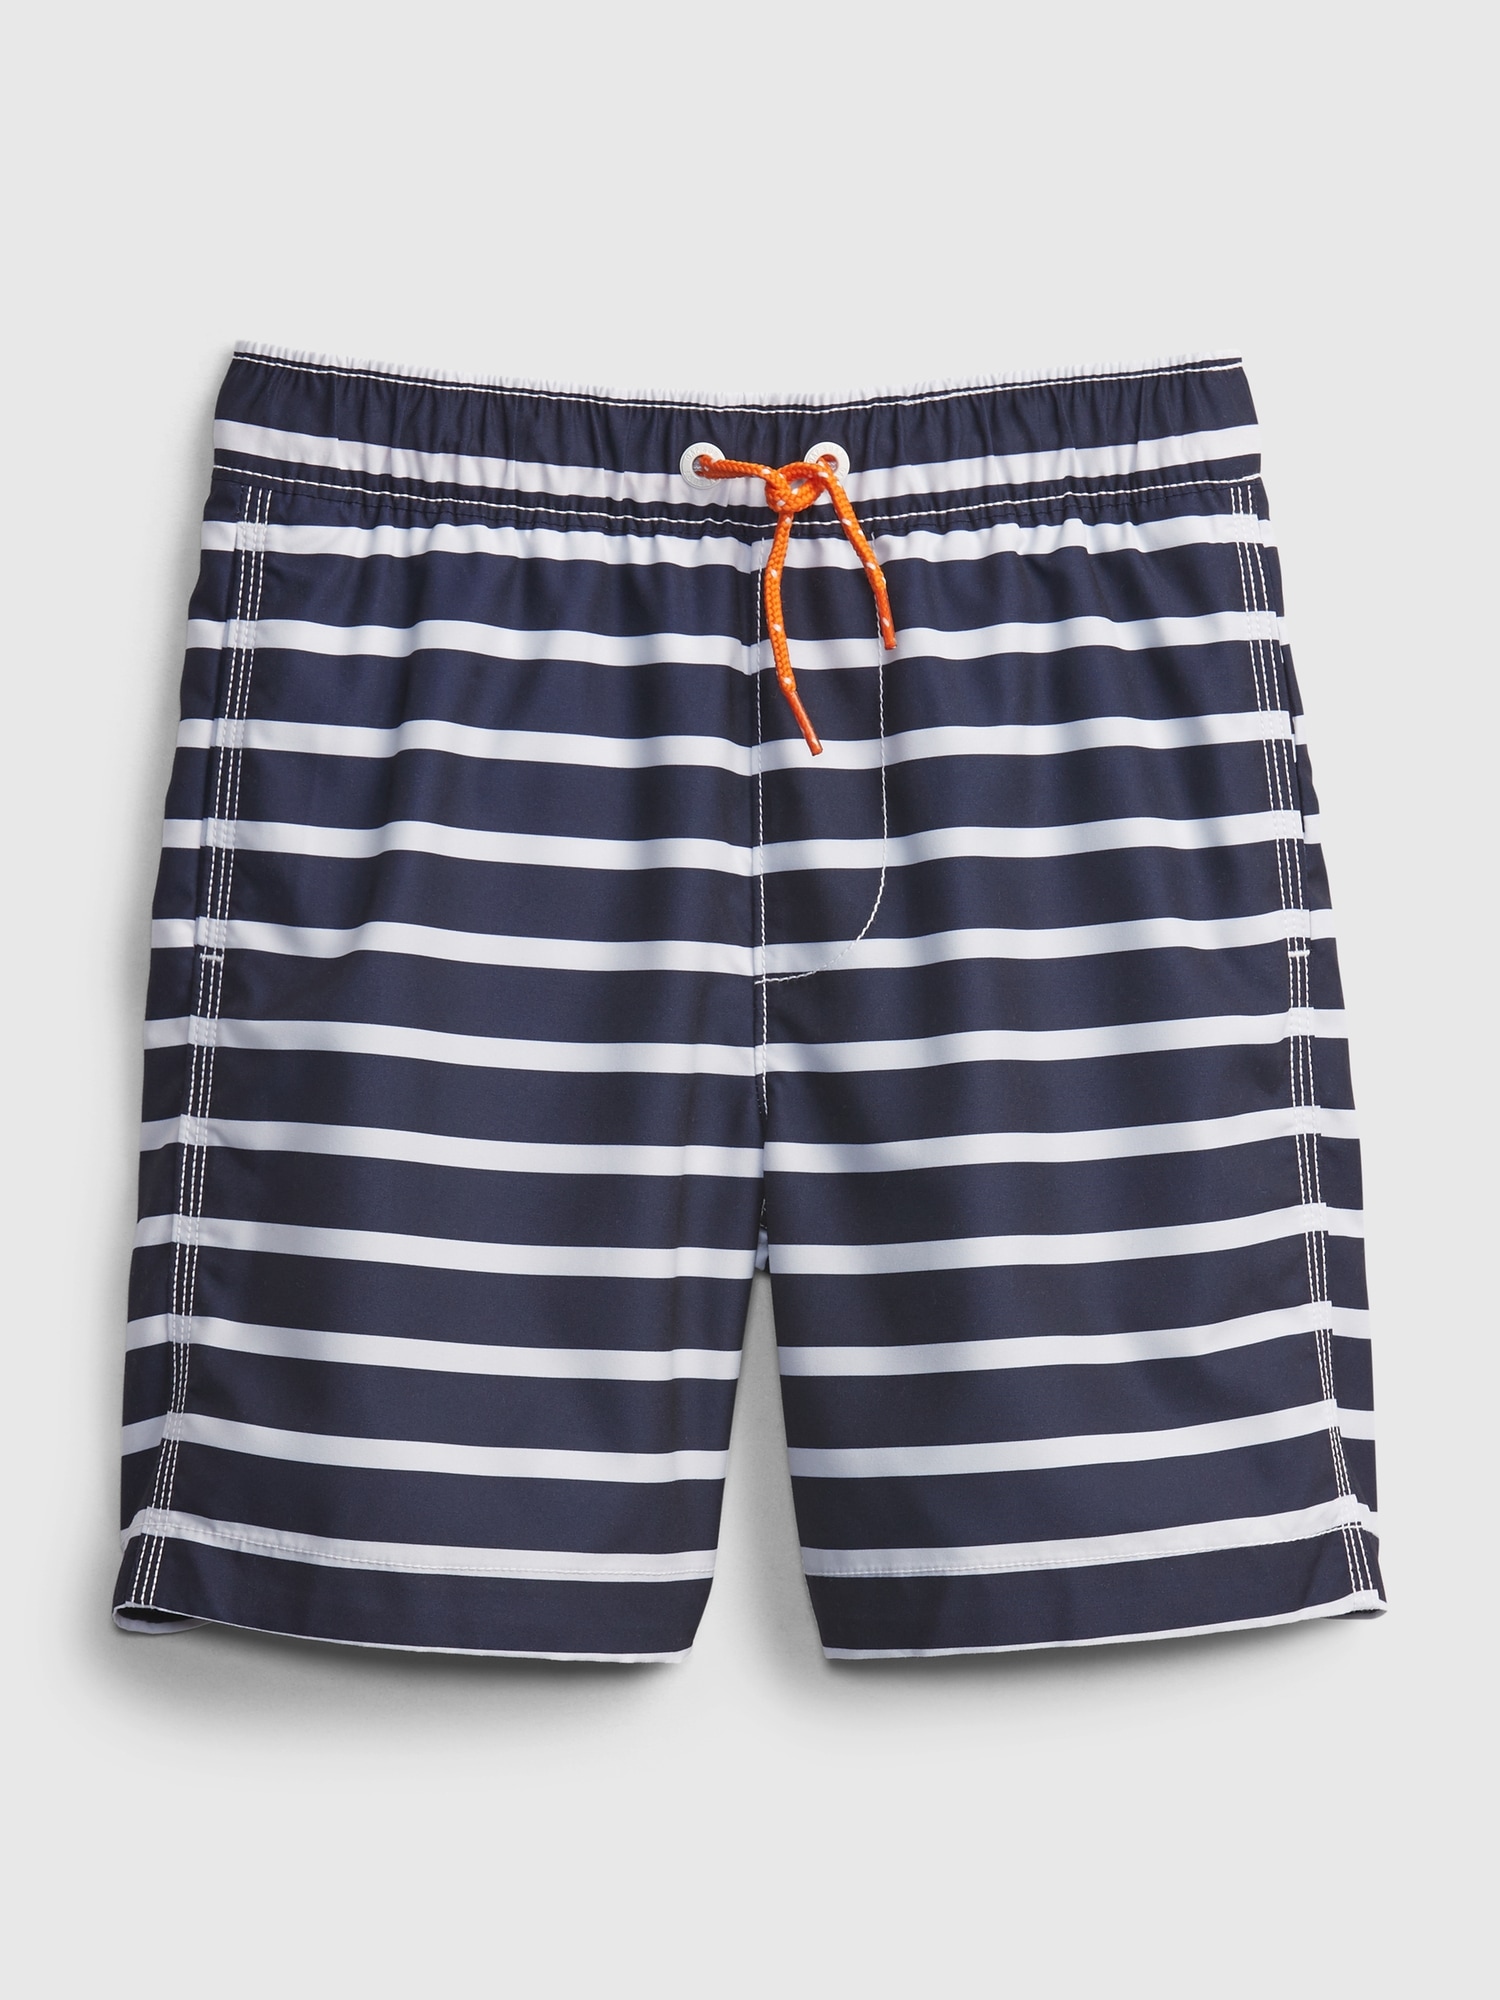 Kids Recycled Polyester Printed Swim Trunks